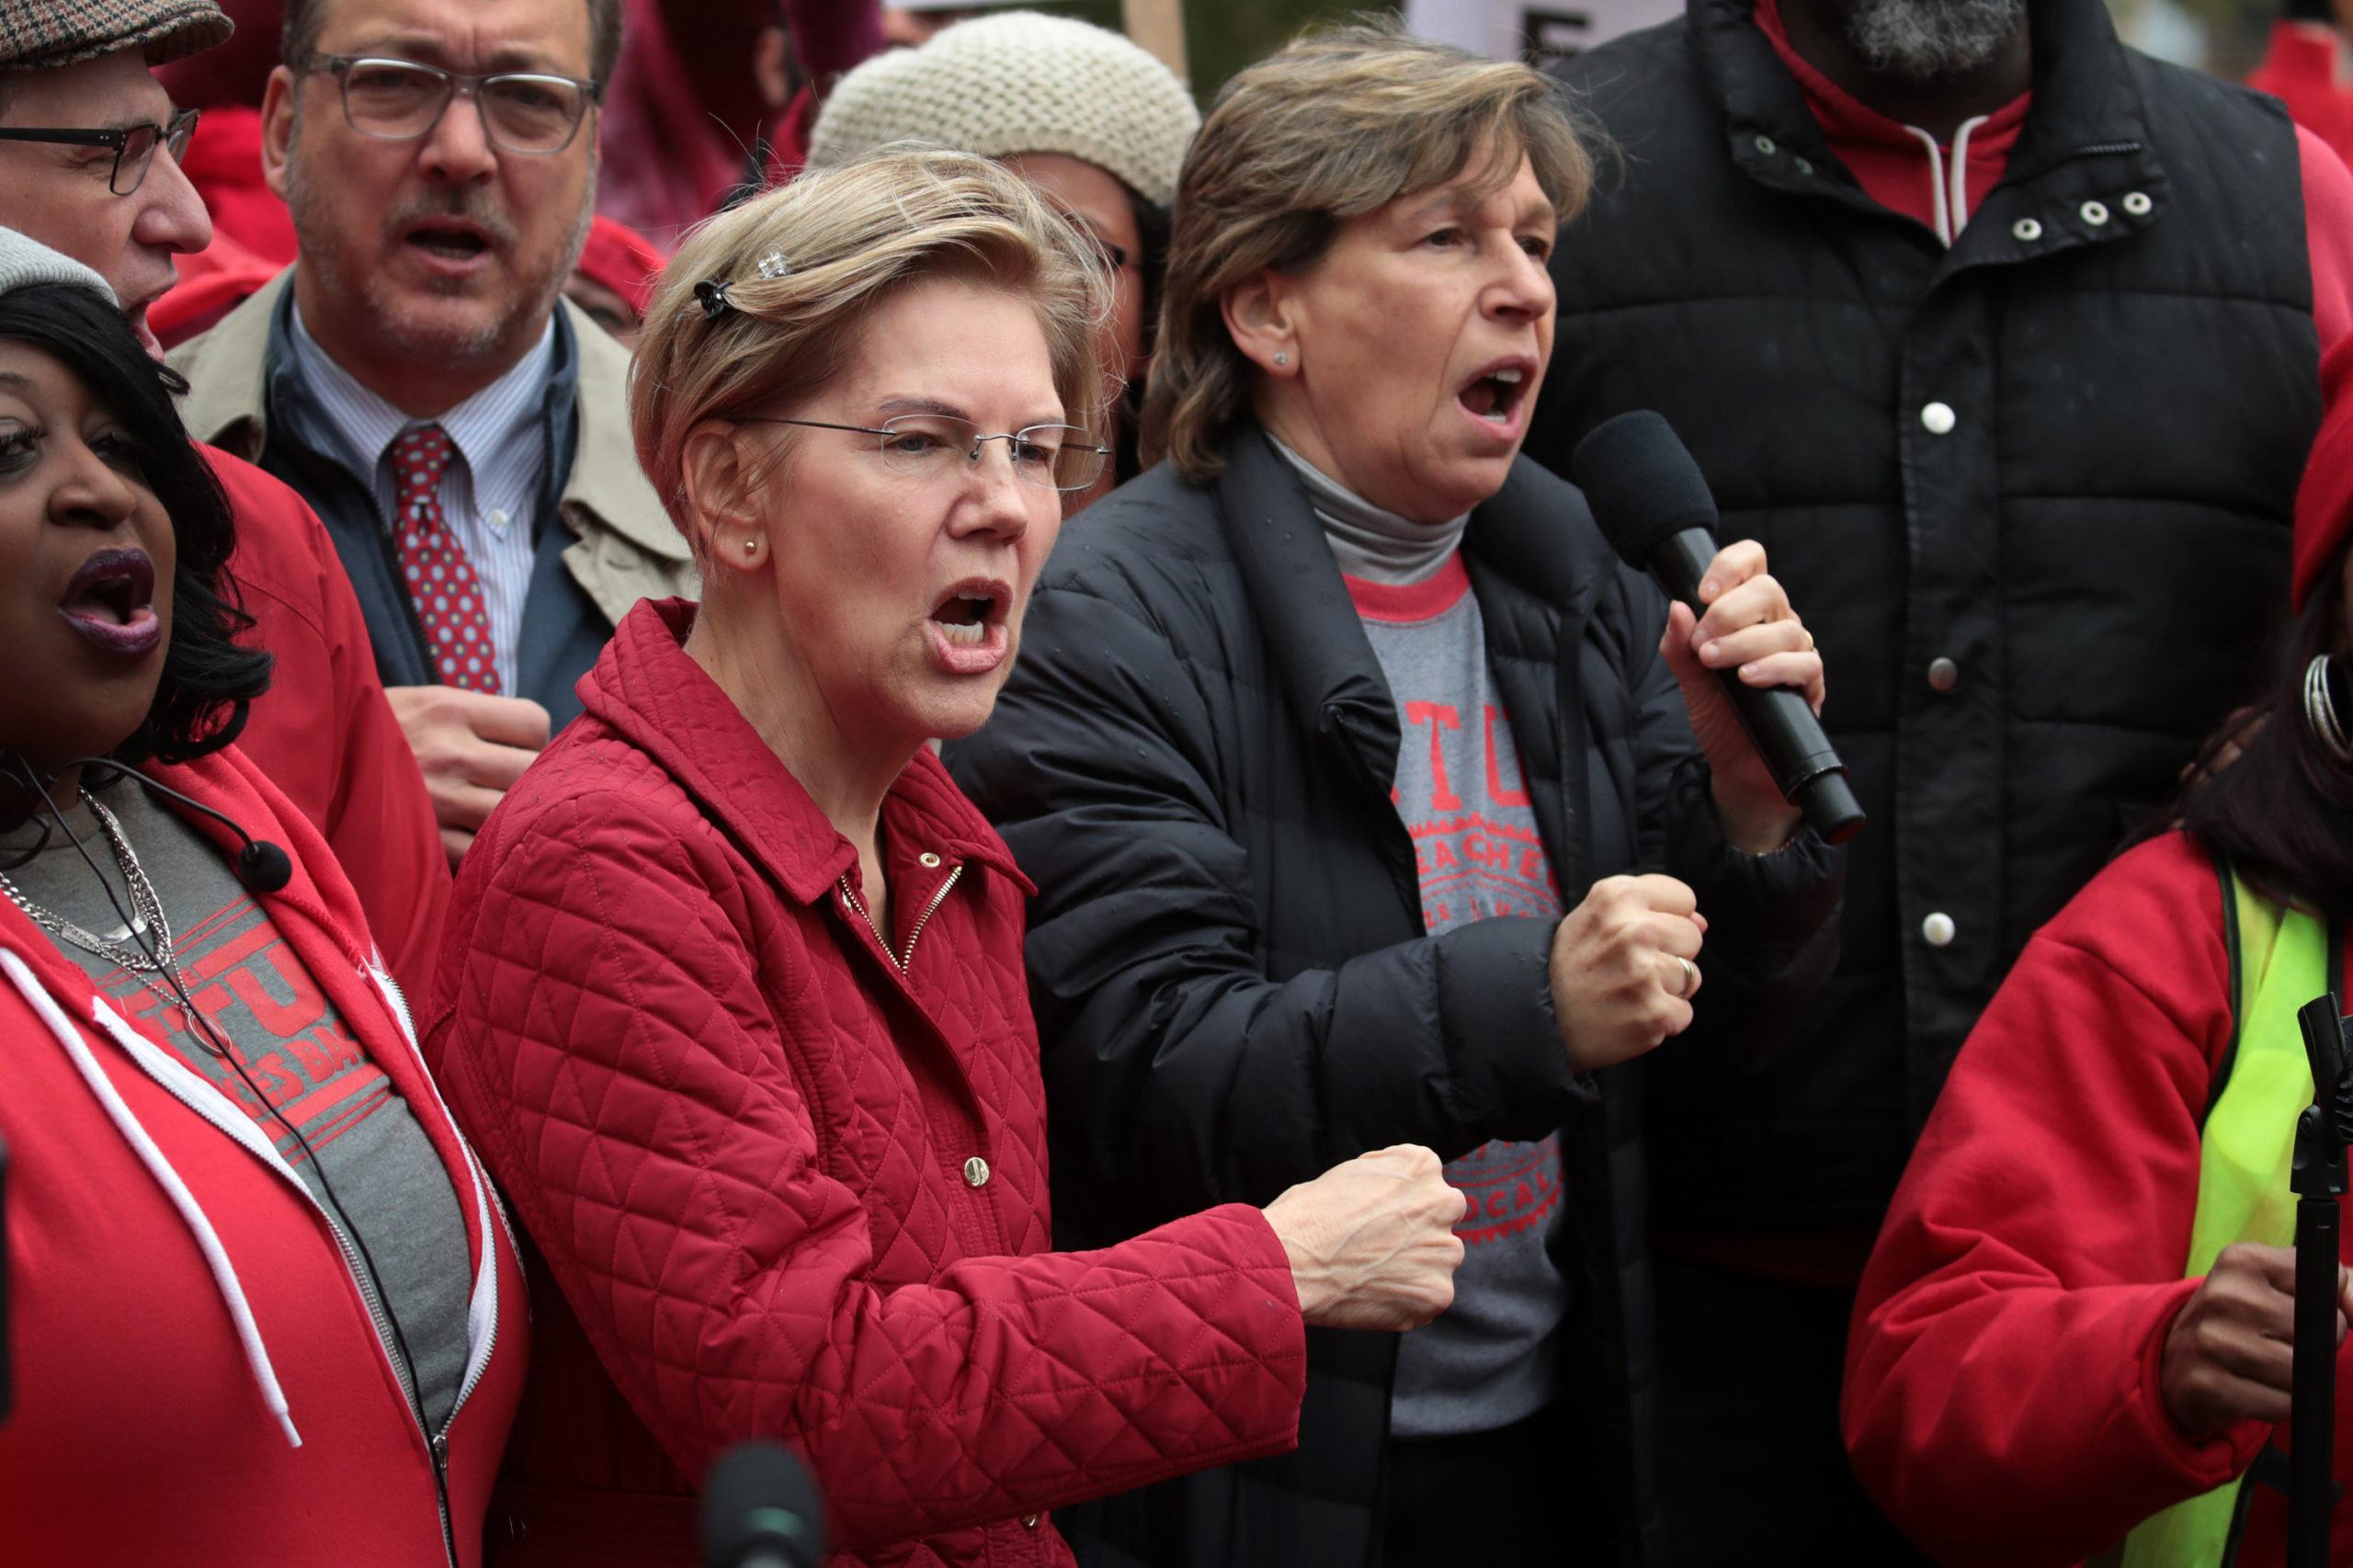 Democratic presidential candidate Sen. Elizabeth Warren (D-MA) (L) and American Federation of Teachers (AFT) president Randi Weingarten visit with striking Chicago teachers at Oscar DePriest Elementary School on October 22, 2019 in Chicago, Illinois. About 25,000 Chicago school teachers went on strike last week after the Chicago Teachers Union (CTU) failed to reach a contract agreement with the city. With about 300,000 students, Chicago has the third largest public school system in the nation. (Photo by Scott Olson/Getty Images)